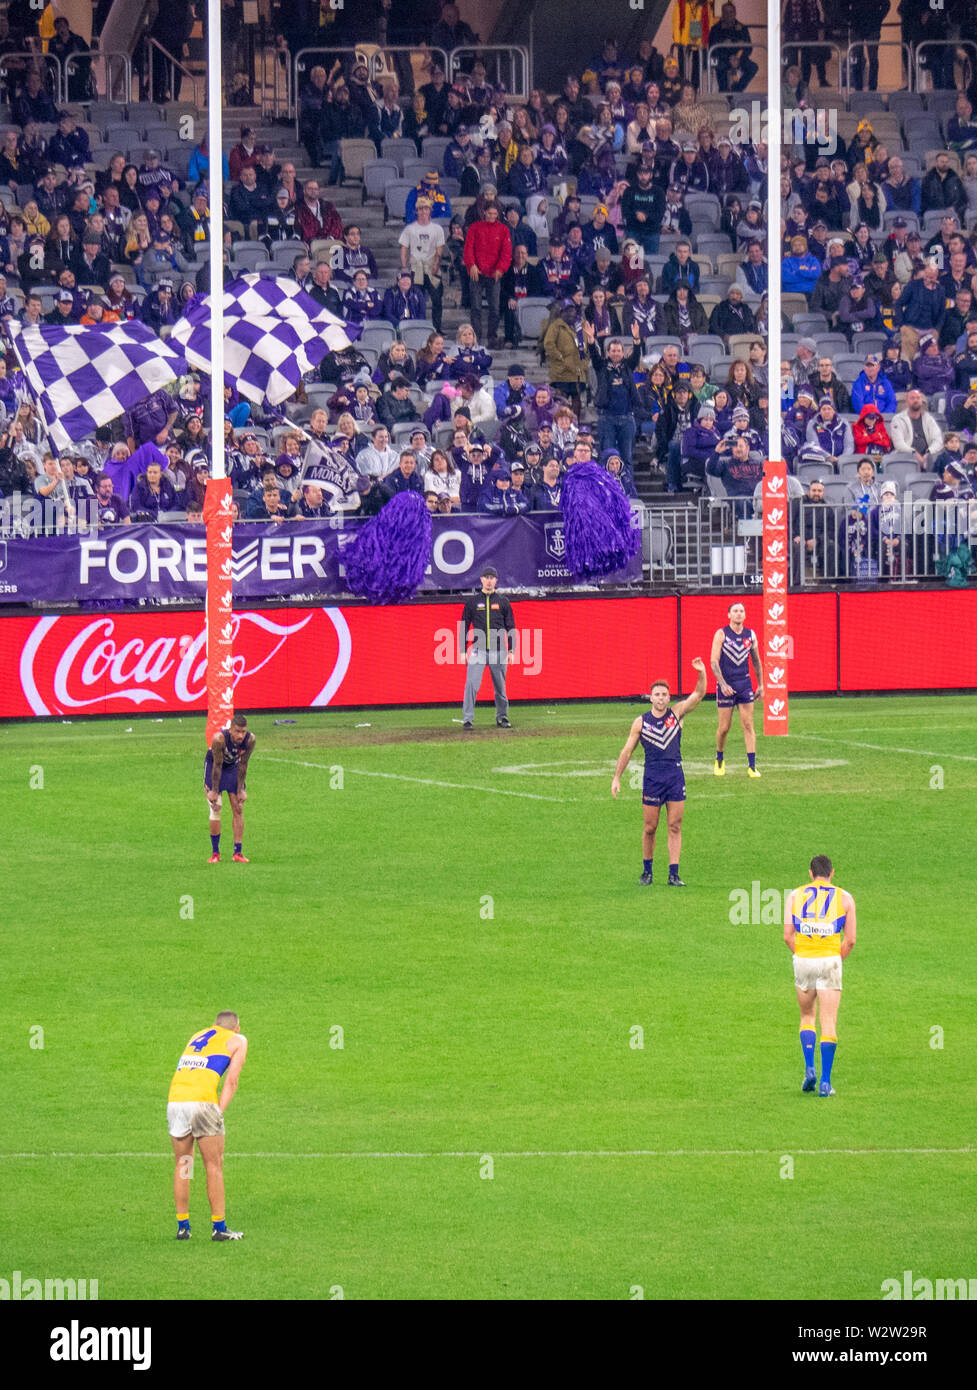 West Coast Eagles footballer Jack Darling kicking for goal in a Western Derby AFL game at Optus Stadium Perth Western Australia. Stock Photo